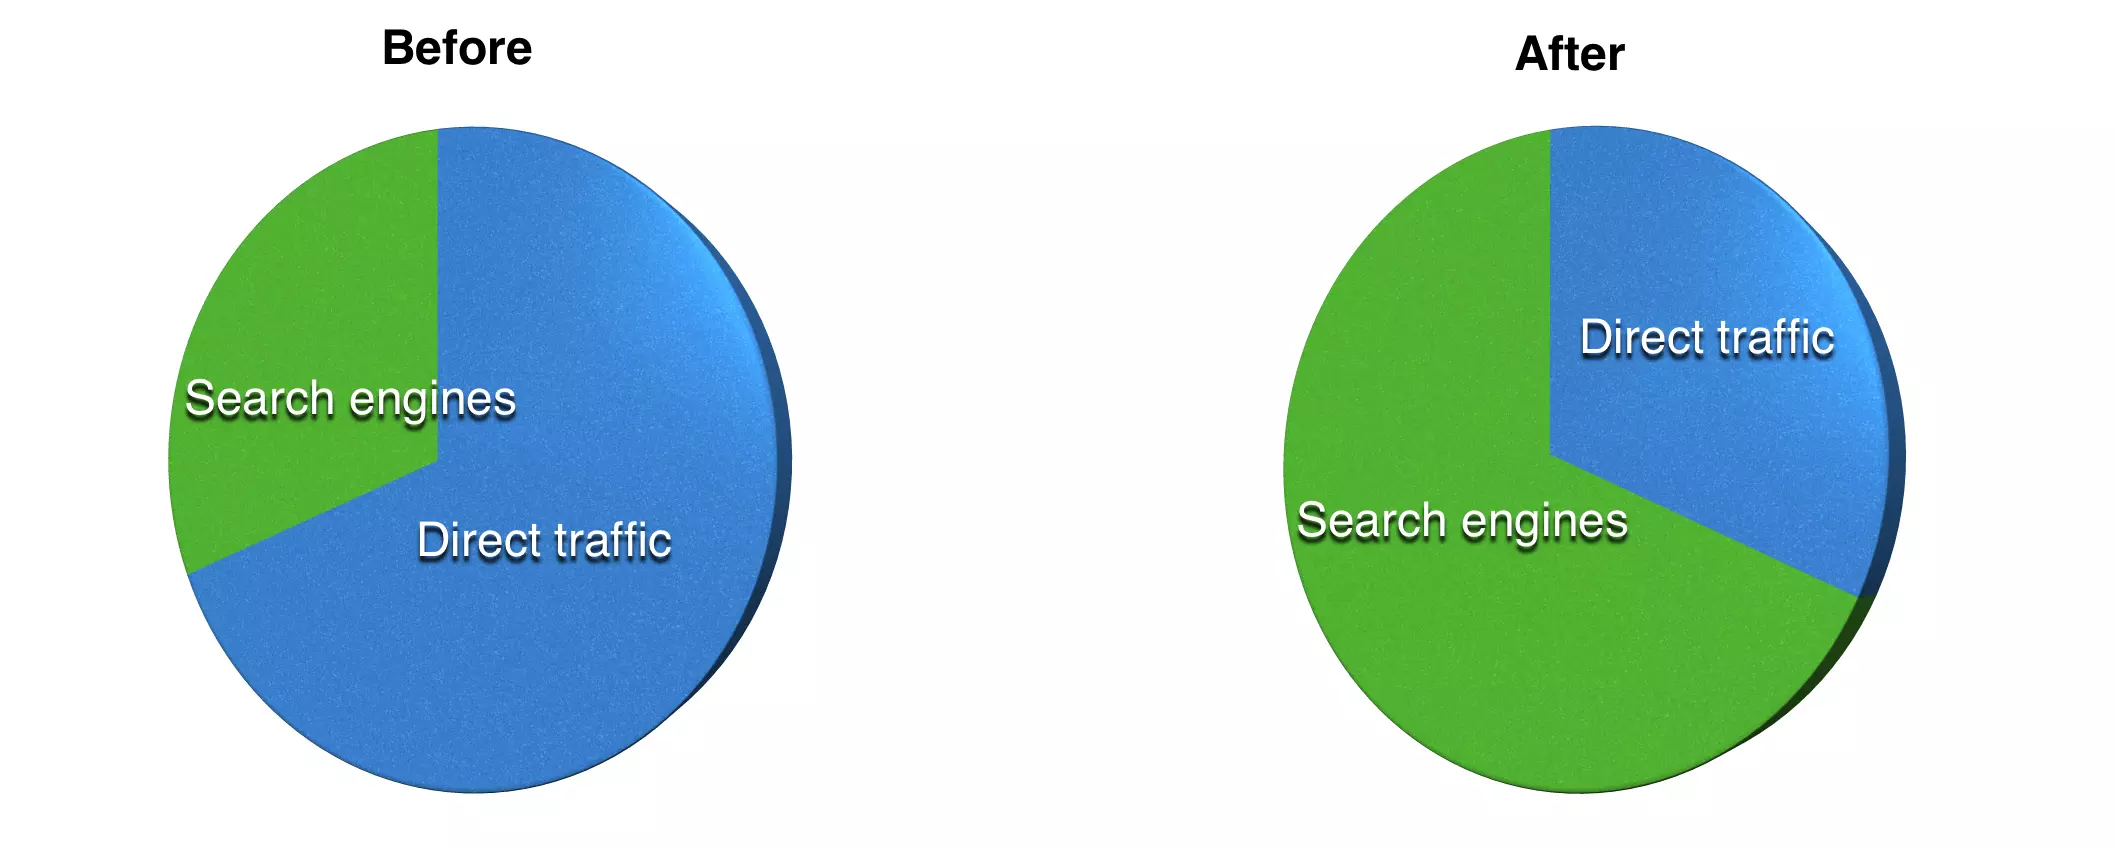 Before and After Implementing SEO Web Design